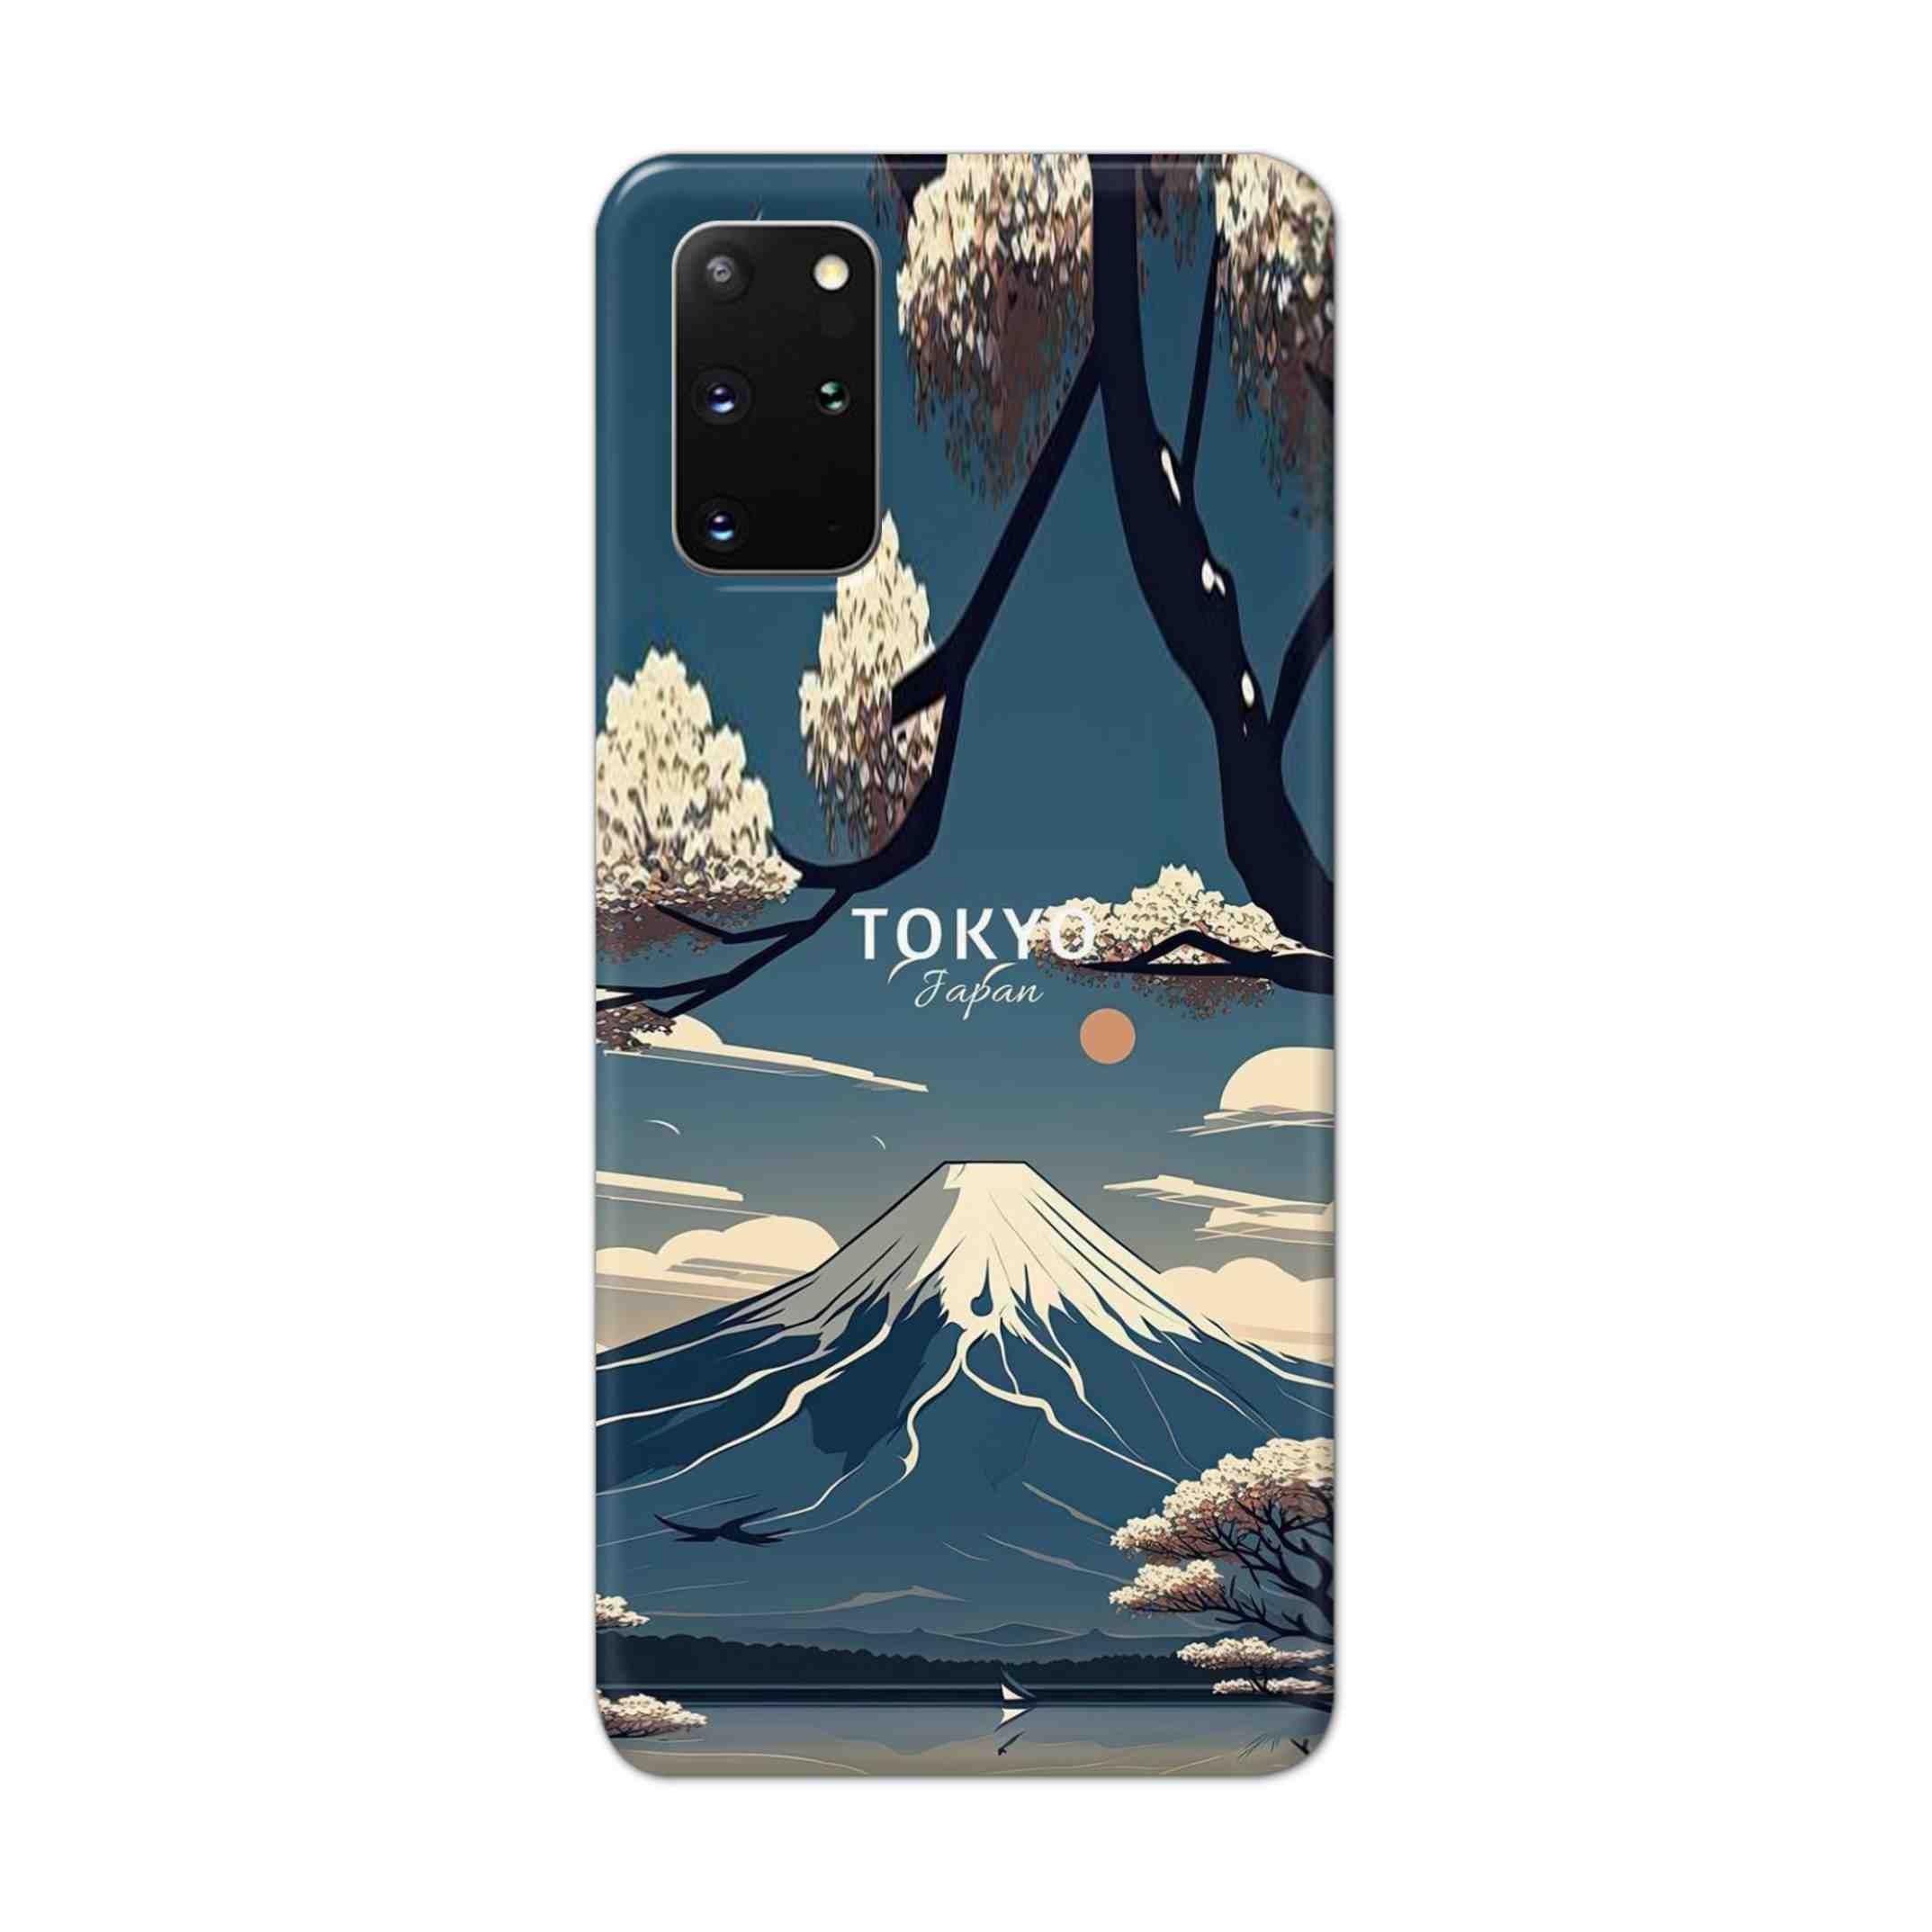 Buy Tokyo Hard Back Mobile Phone Case Cover For Samsung Galaxy S20 Plus Online